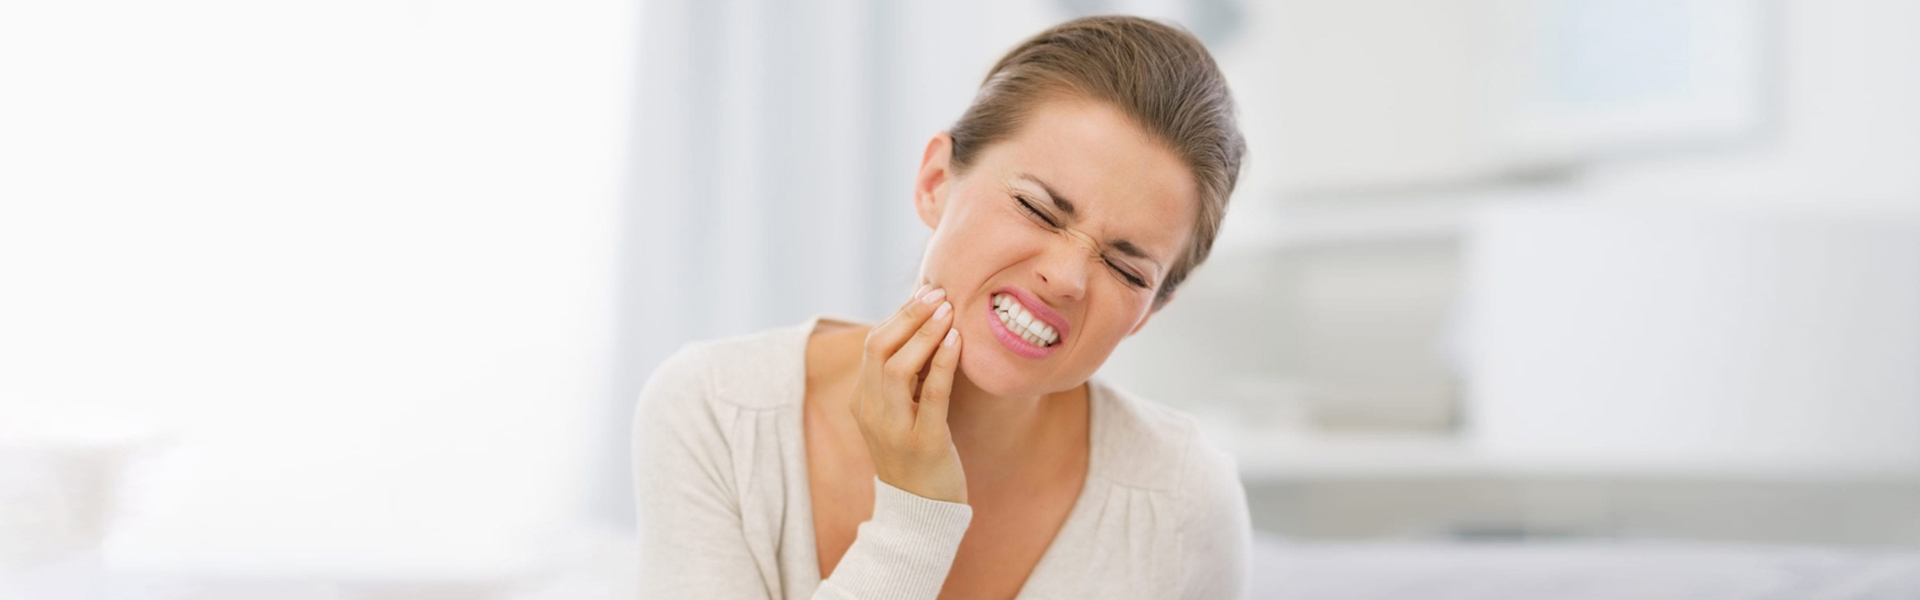 4 Prevalent Dental Issues That Require Urgent or Emergency Dental Care